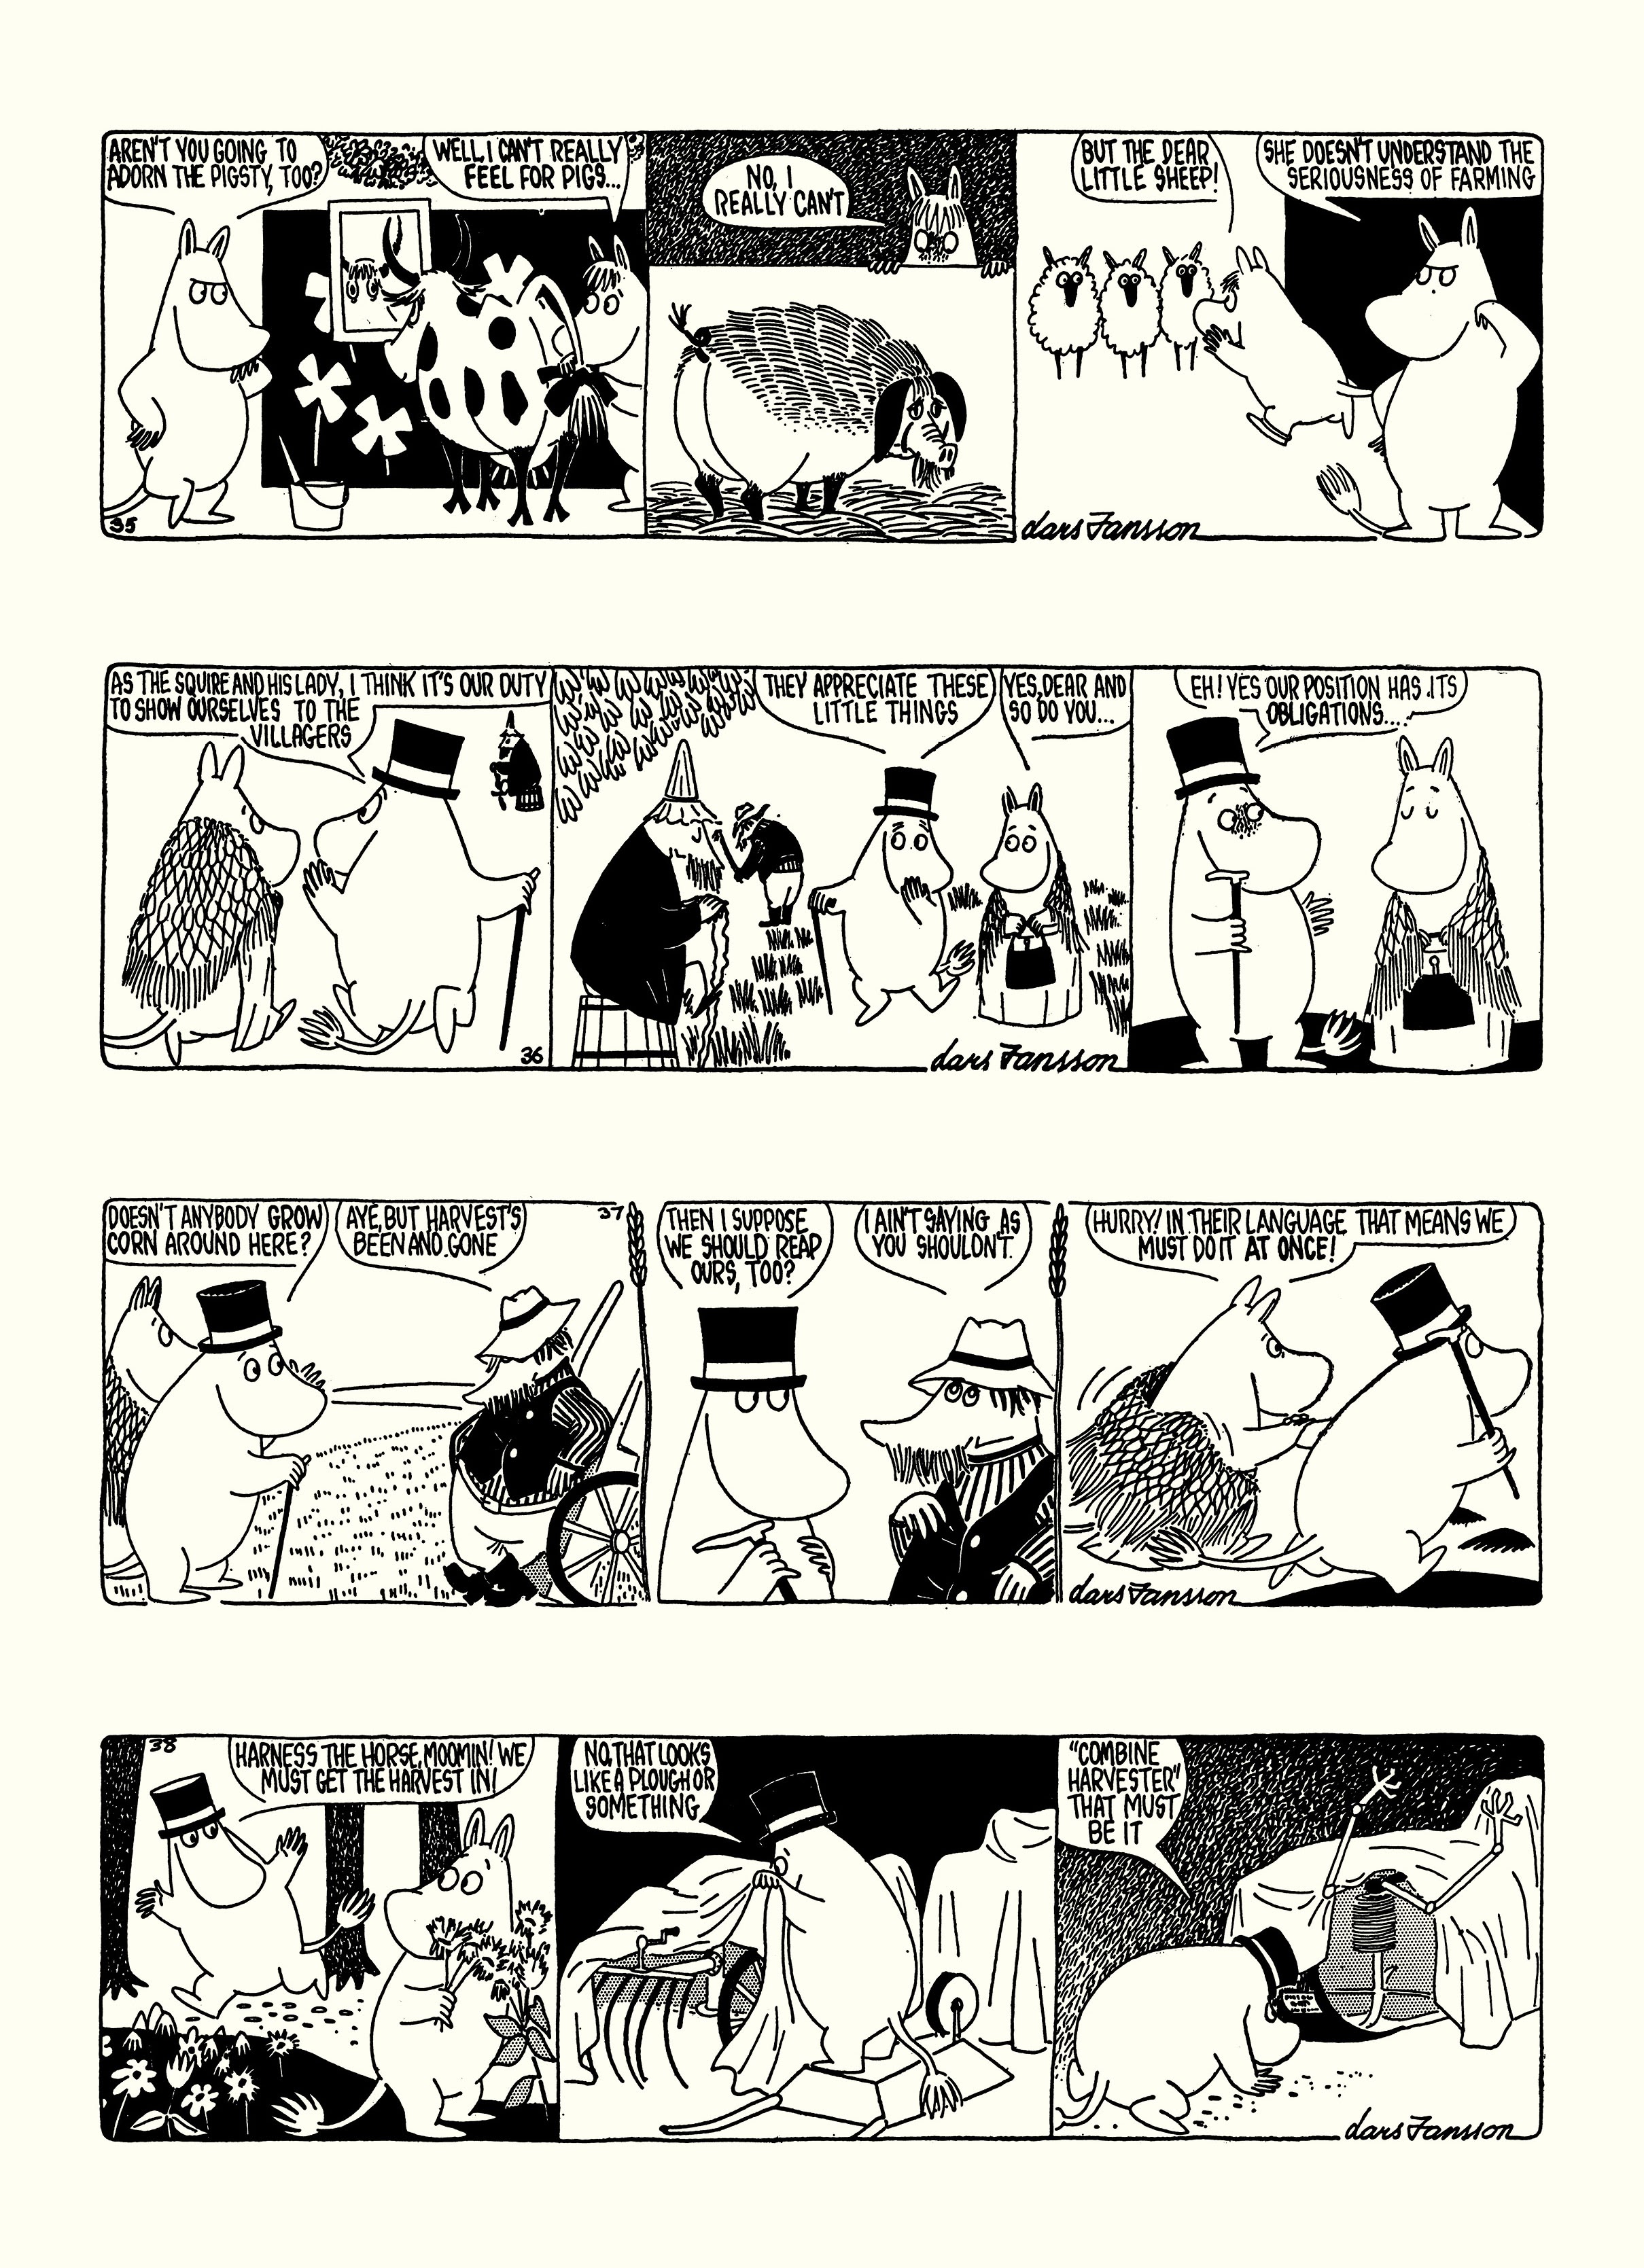 Read online Moomin: The Complete Lars Jansson Comic Strip comic -  Issue # TPB 7 - 57